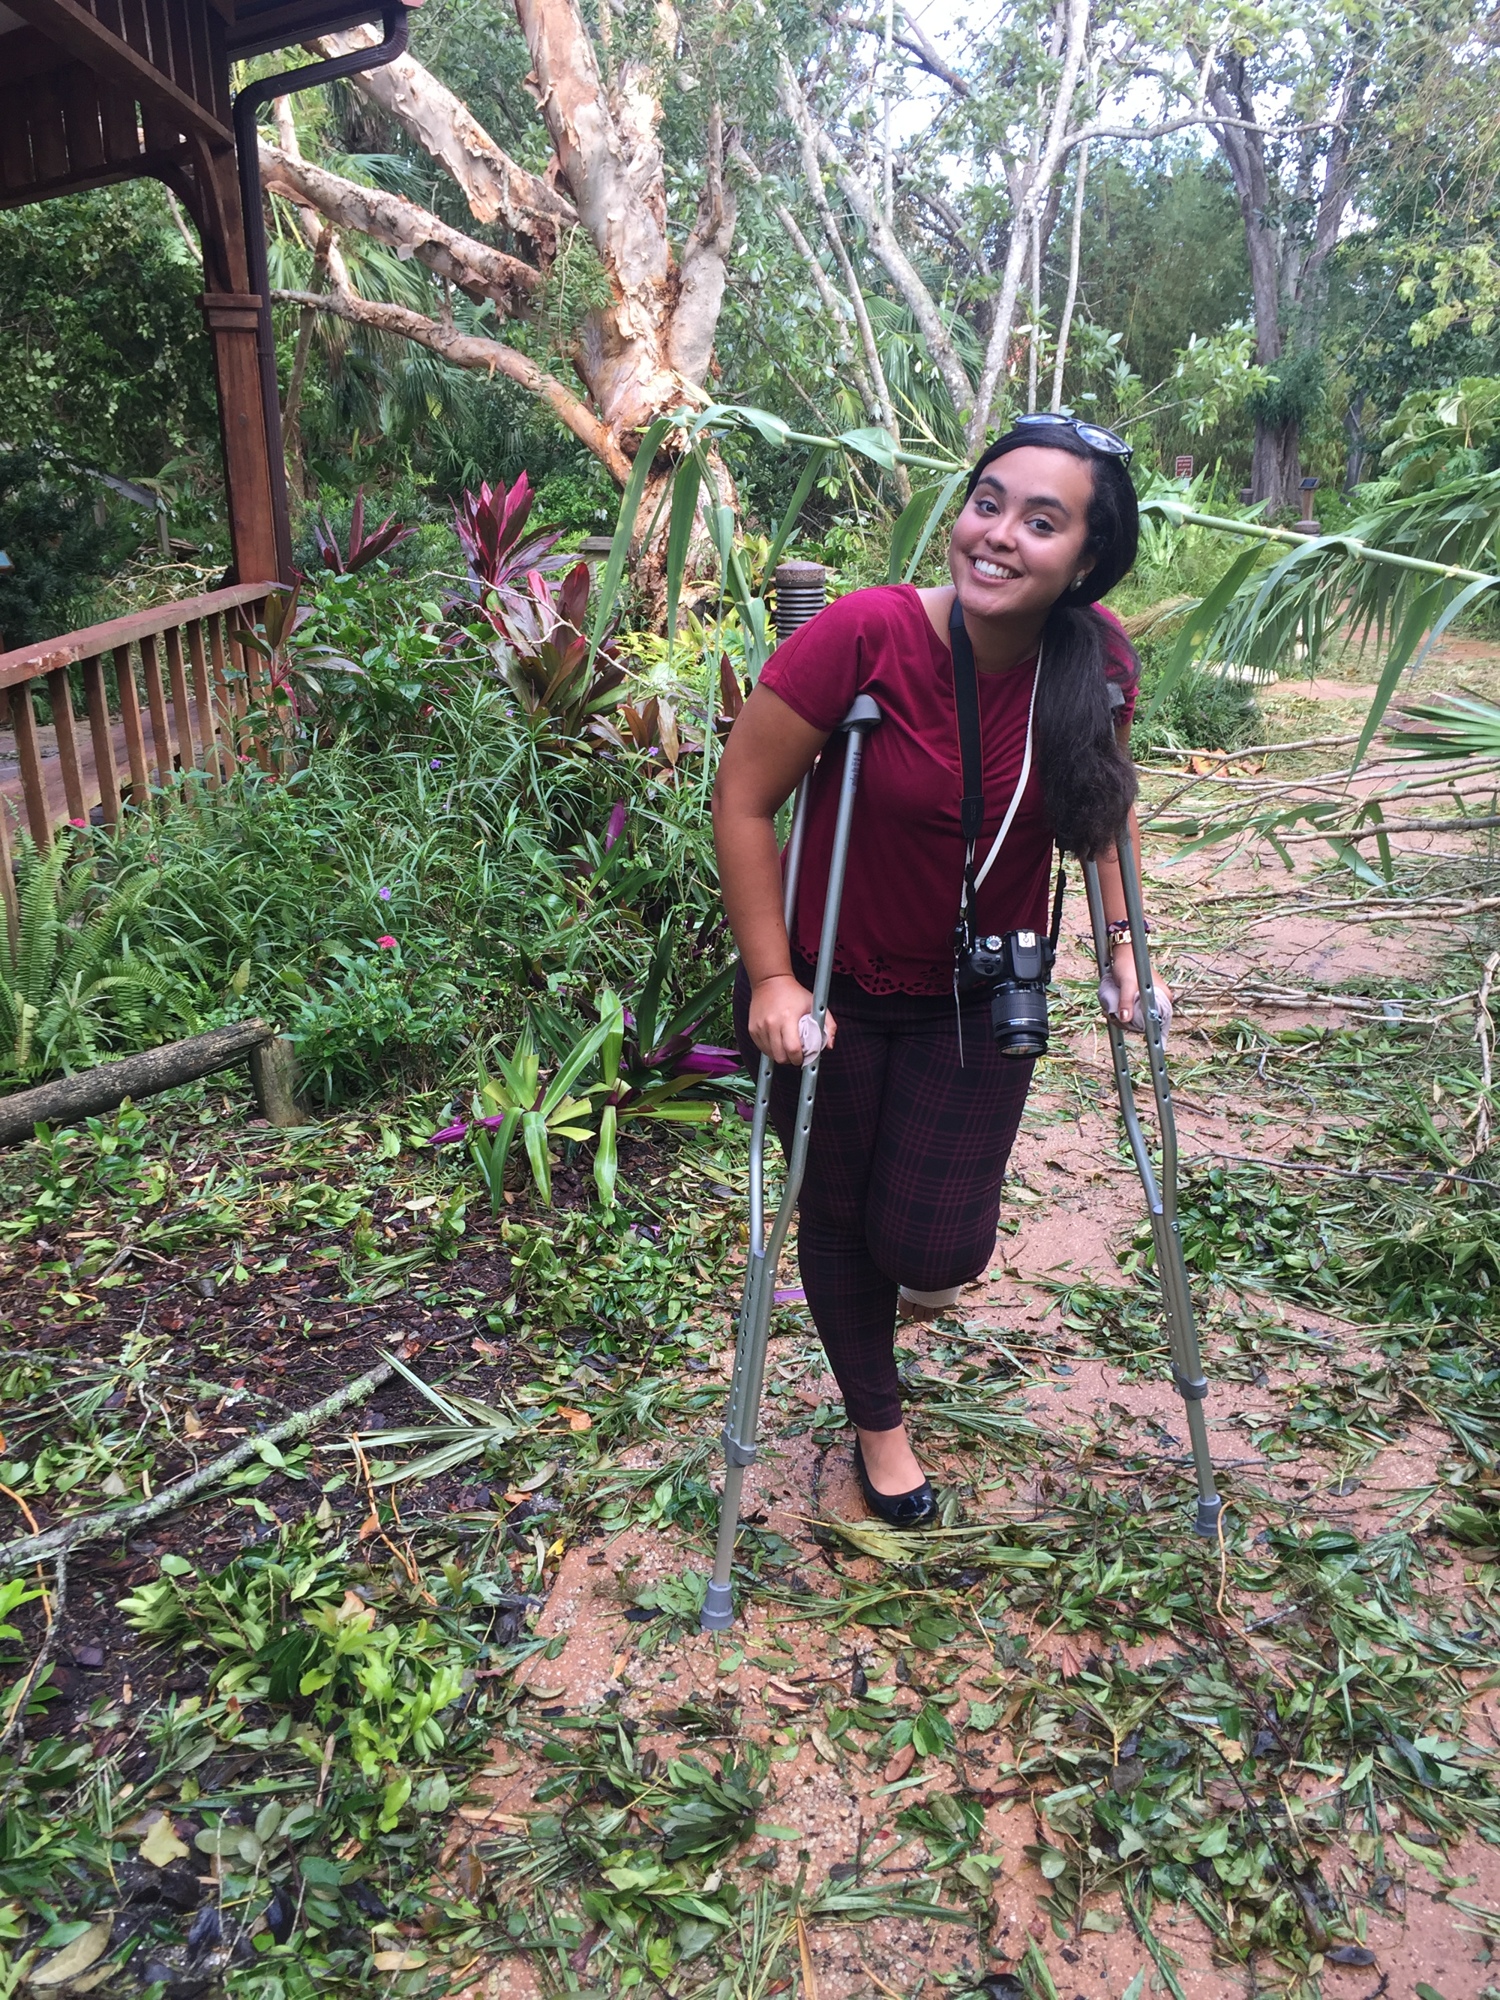 Taking photos of Hurricane Irma's impact on the Ormond Memorial Art Museum gardens on crutches, just three days after my injury.